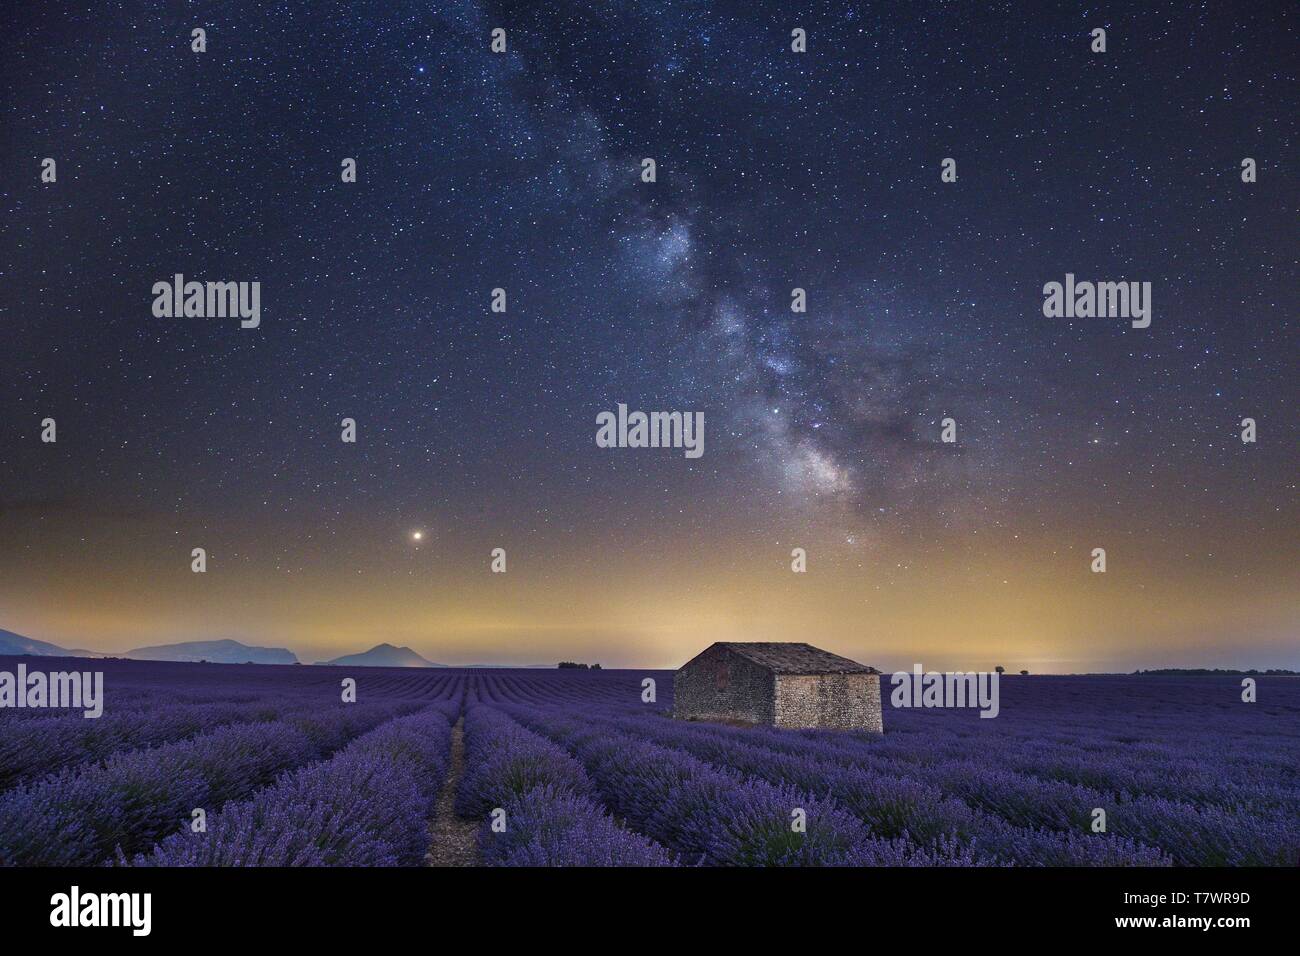 France, Alpes de Haute Provence, Verdon Regional Nature Park, Puimoisson, stone cottage at night in the middle of a lavender field (Lavandin) on the Plateau de Valensole under the Milky Way and the Mars planet Stock Photo